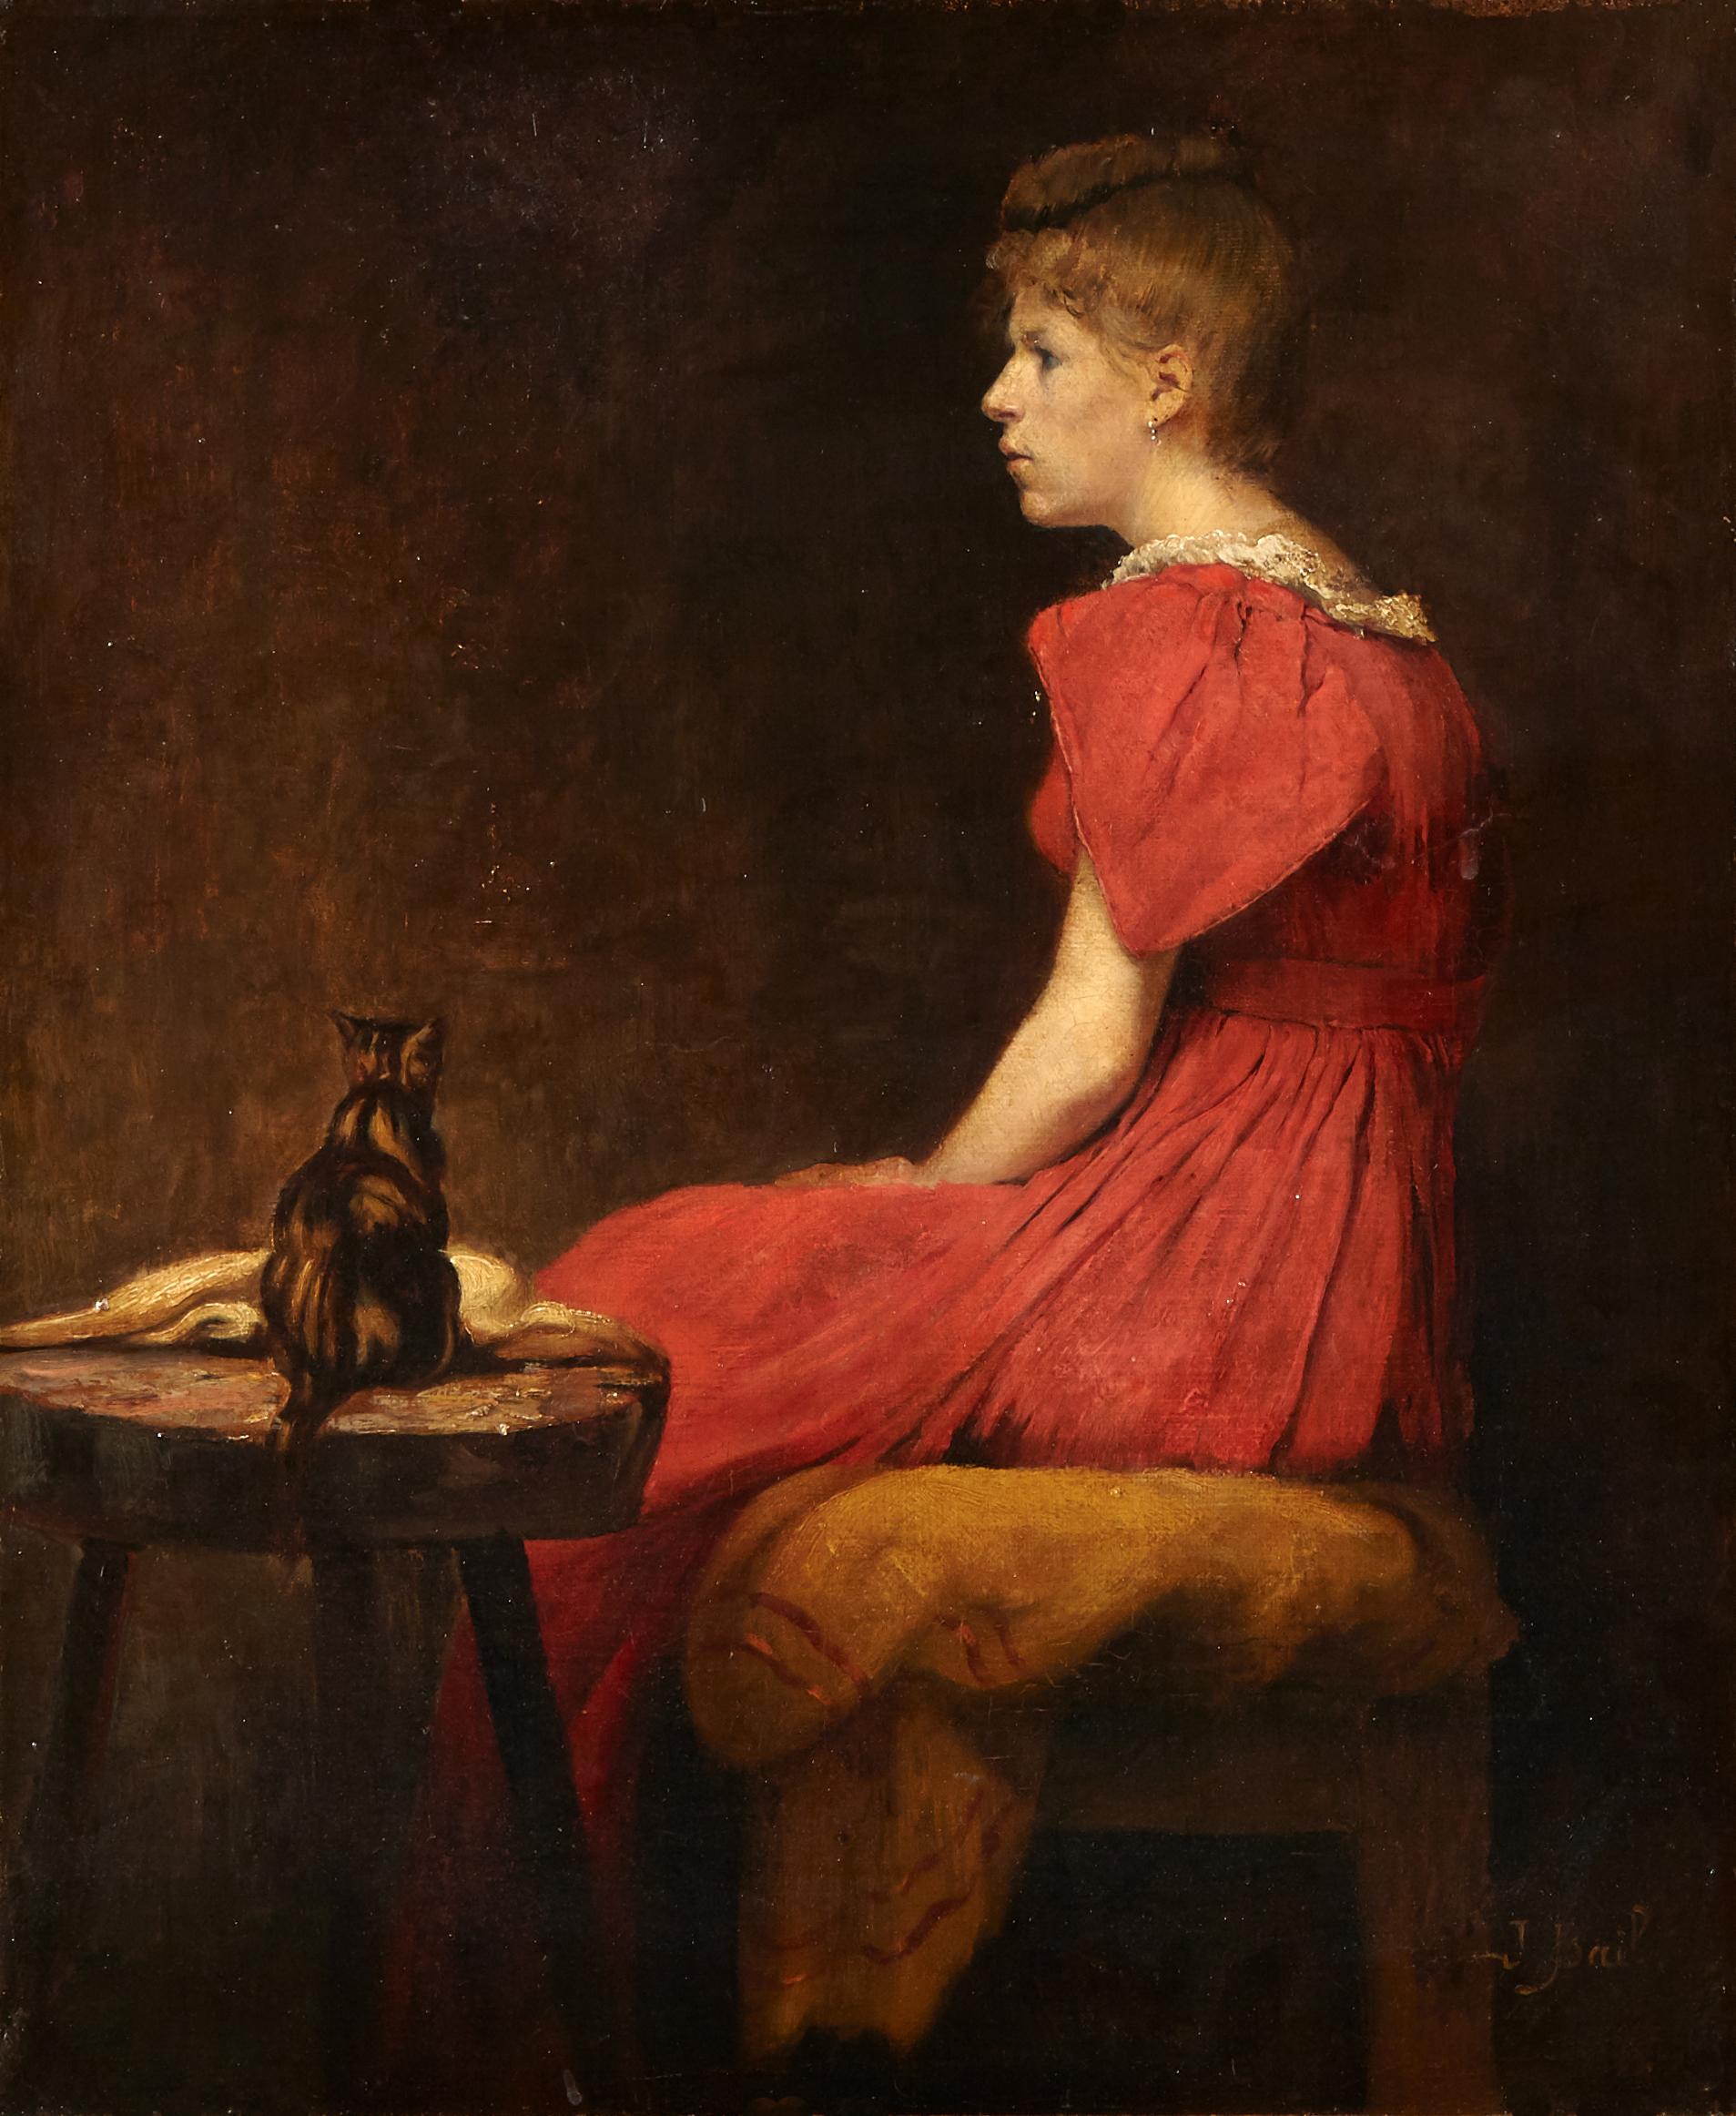 Lady in a red dress with a kitten - Robe - Painting de Joseph Bail